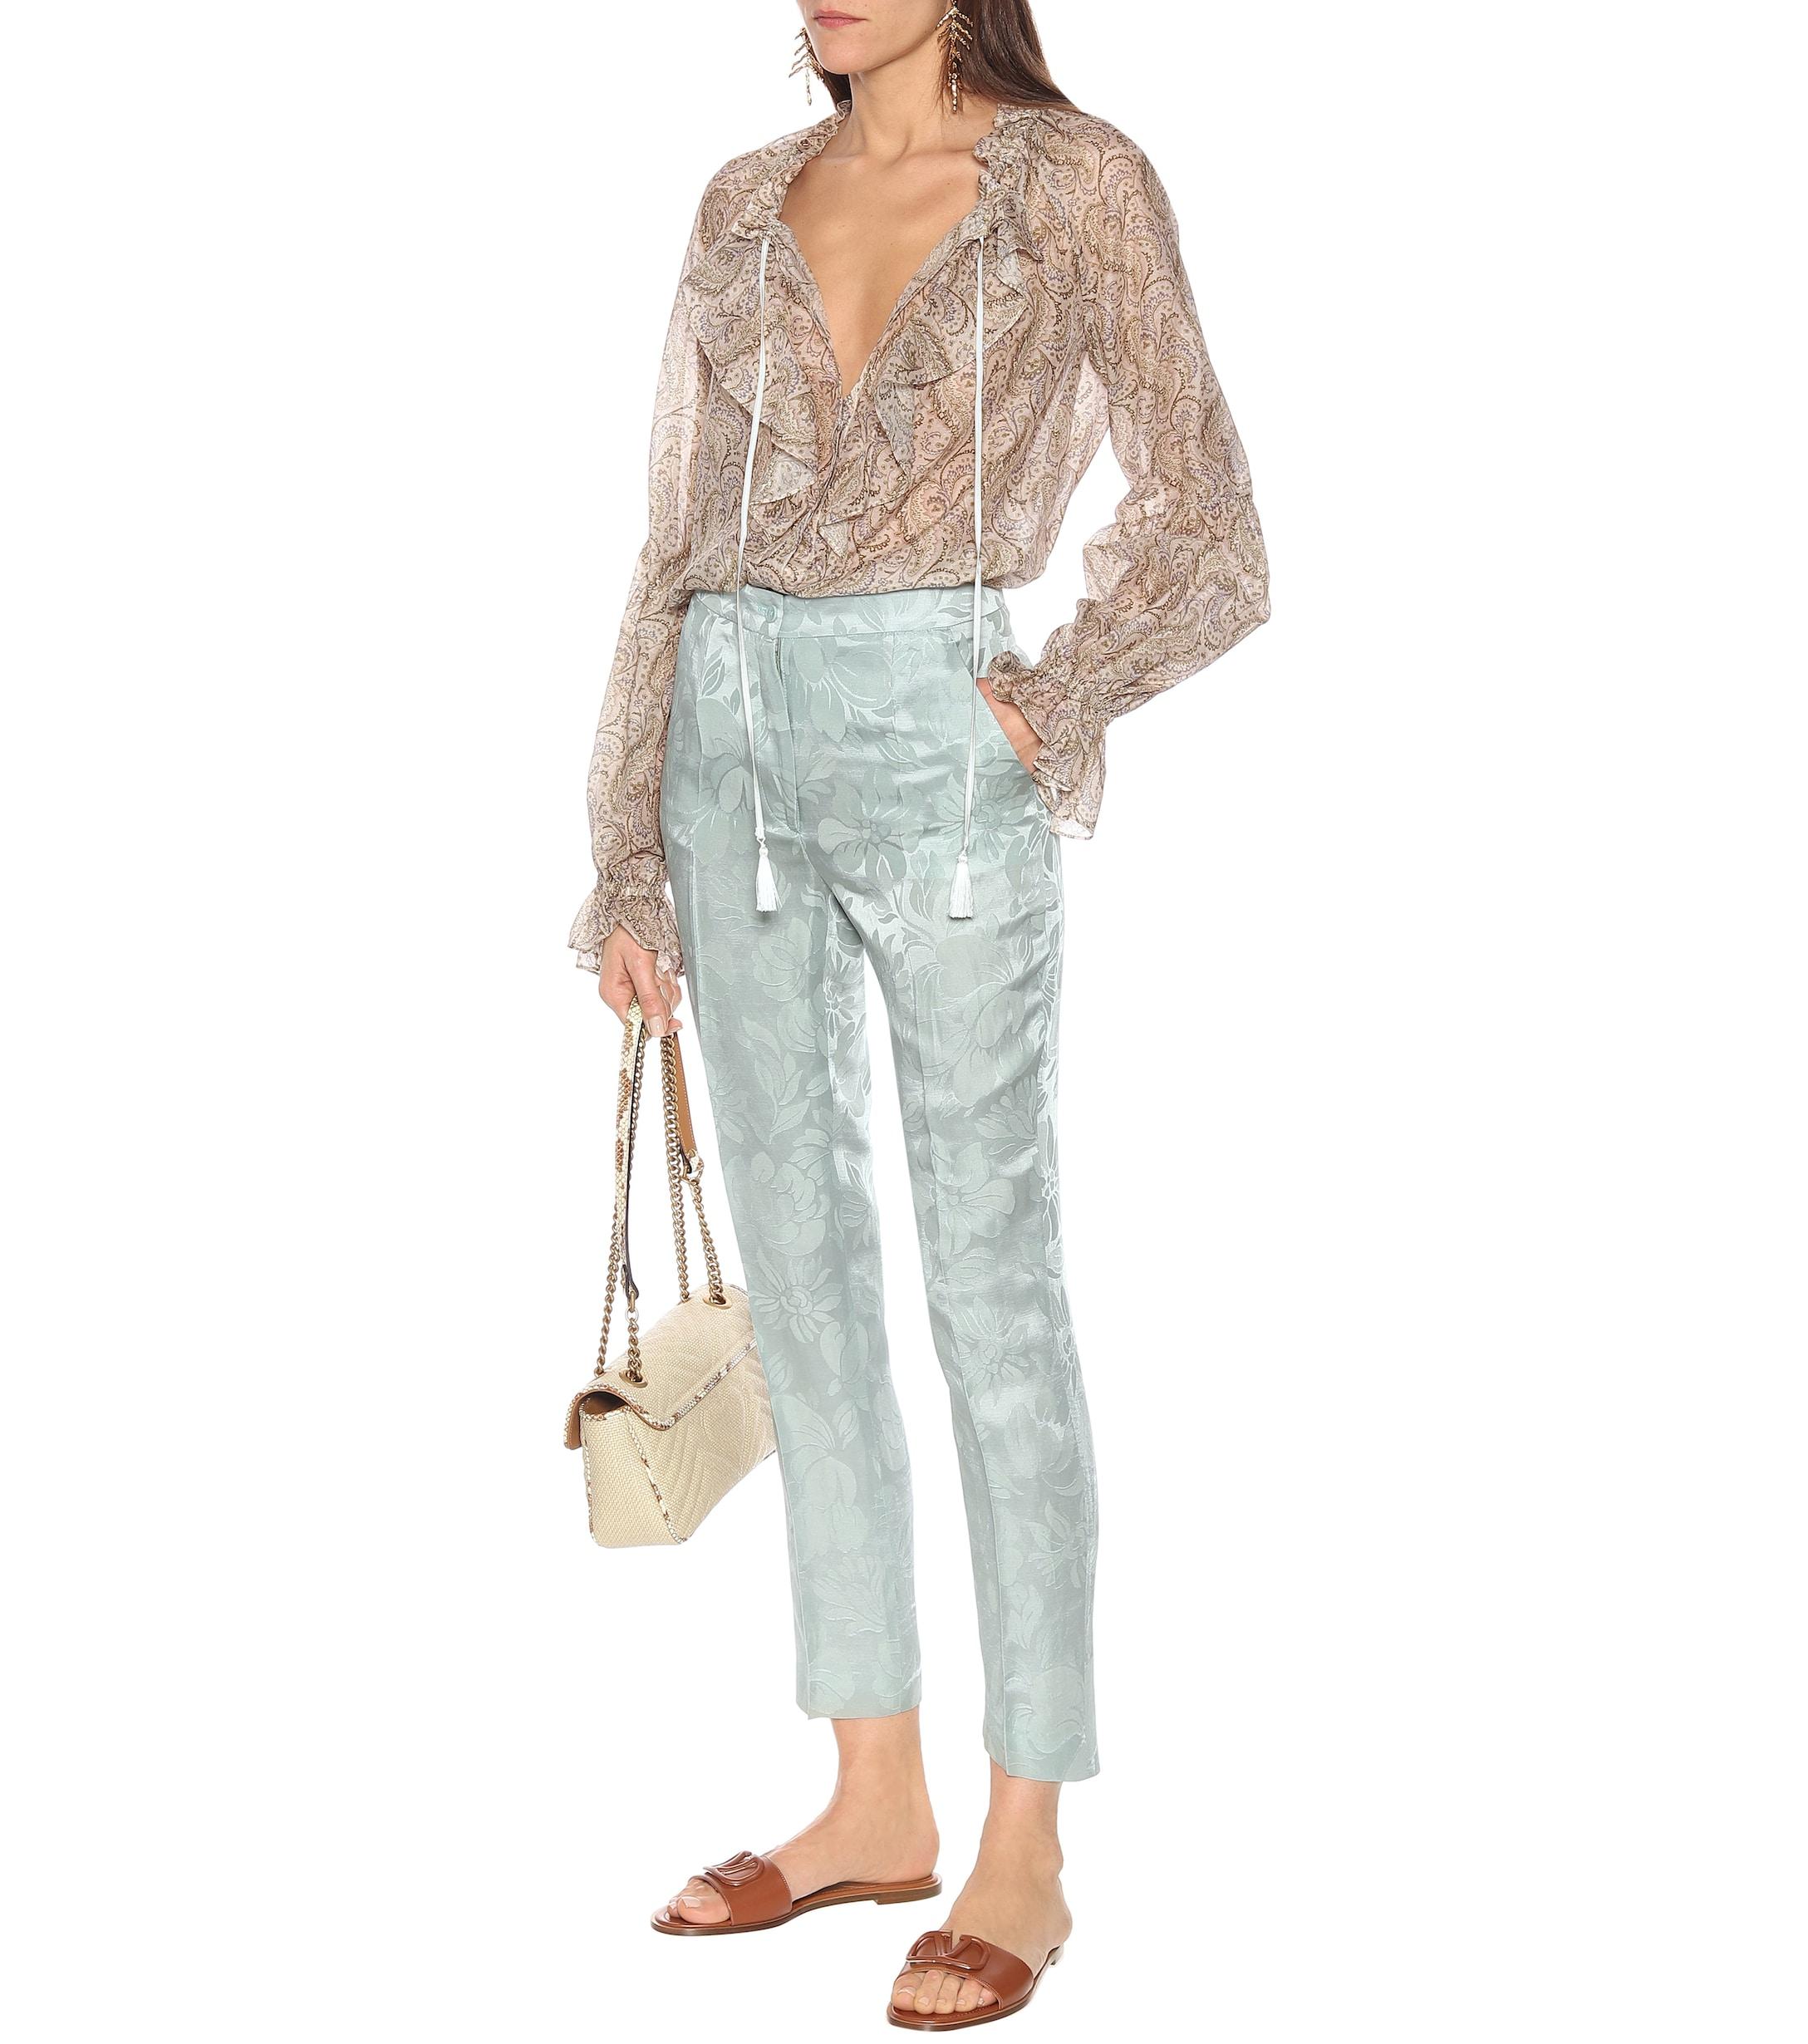 Etro High-rise Skinny Jacquard Pants in Blue - Lyst